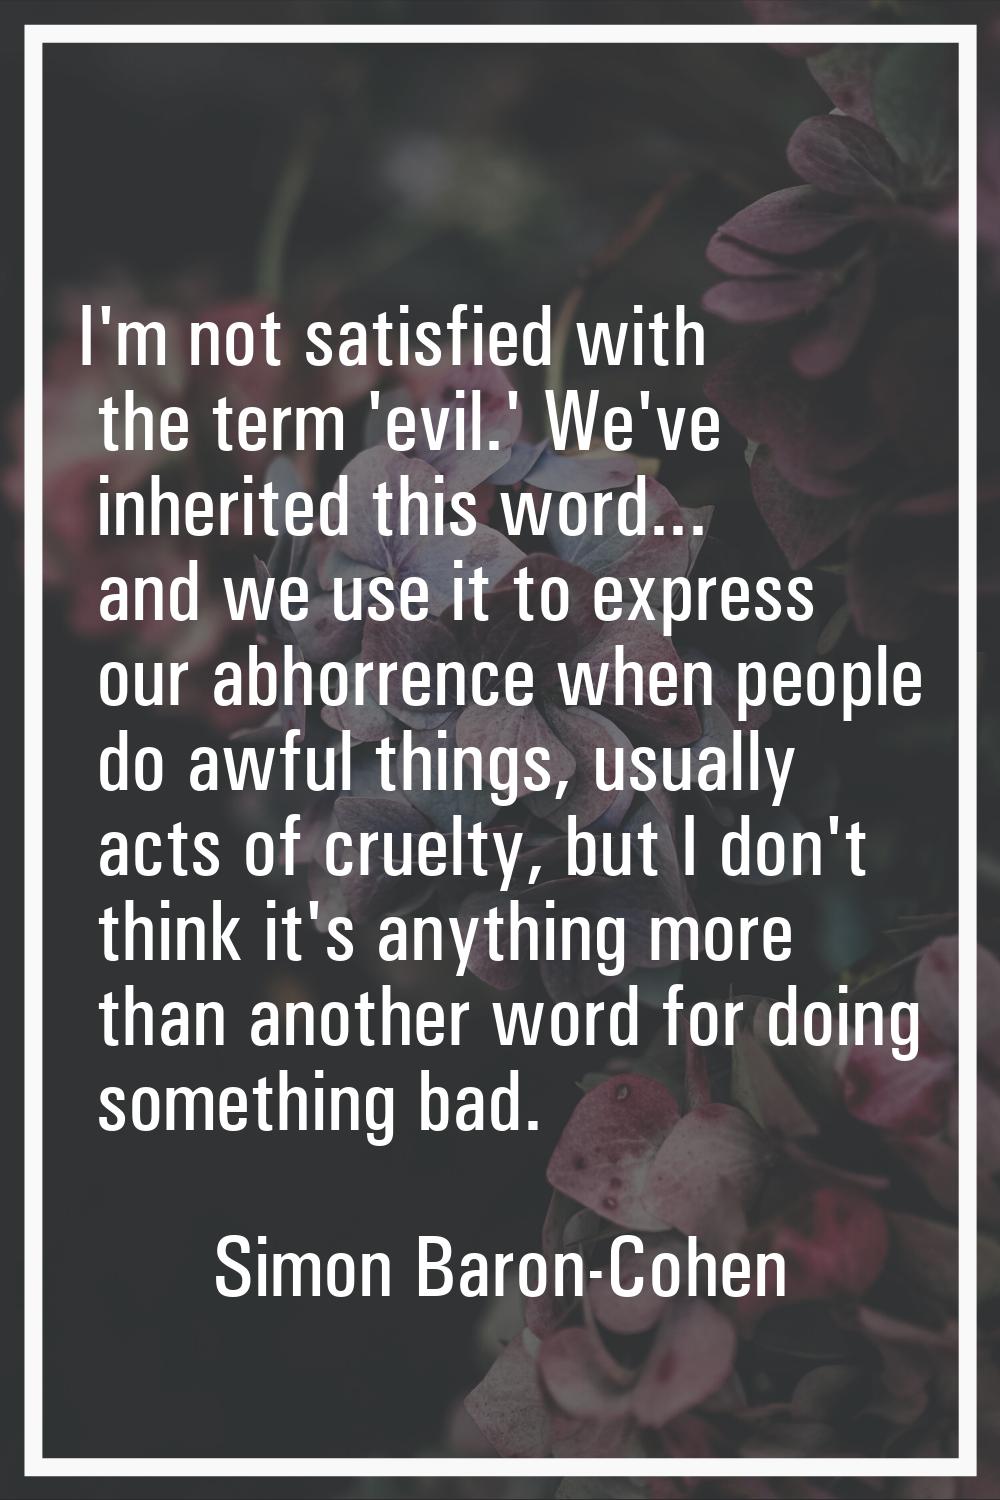 I'm not satisfied with the term 'evil.' We've inherited this word... and we use it to express our a